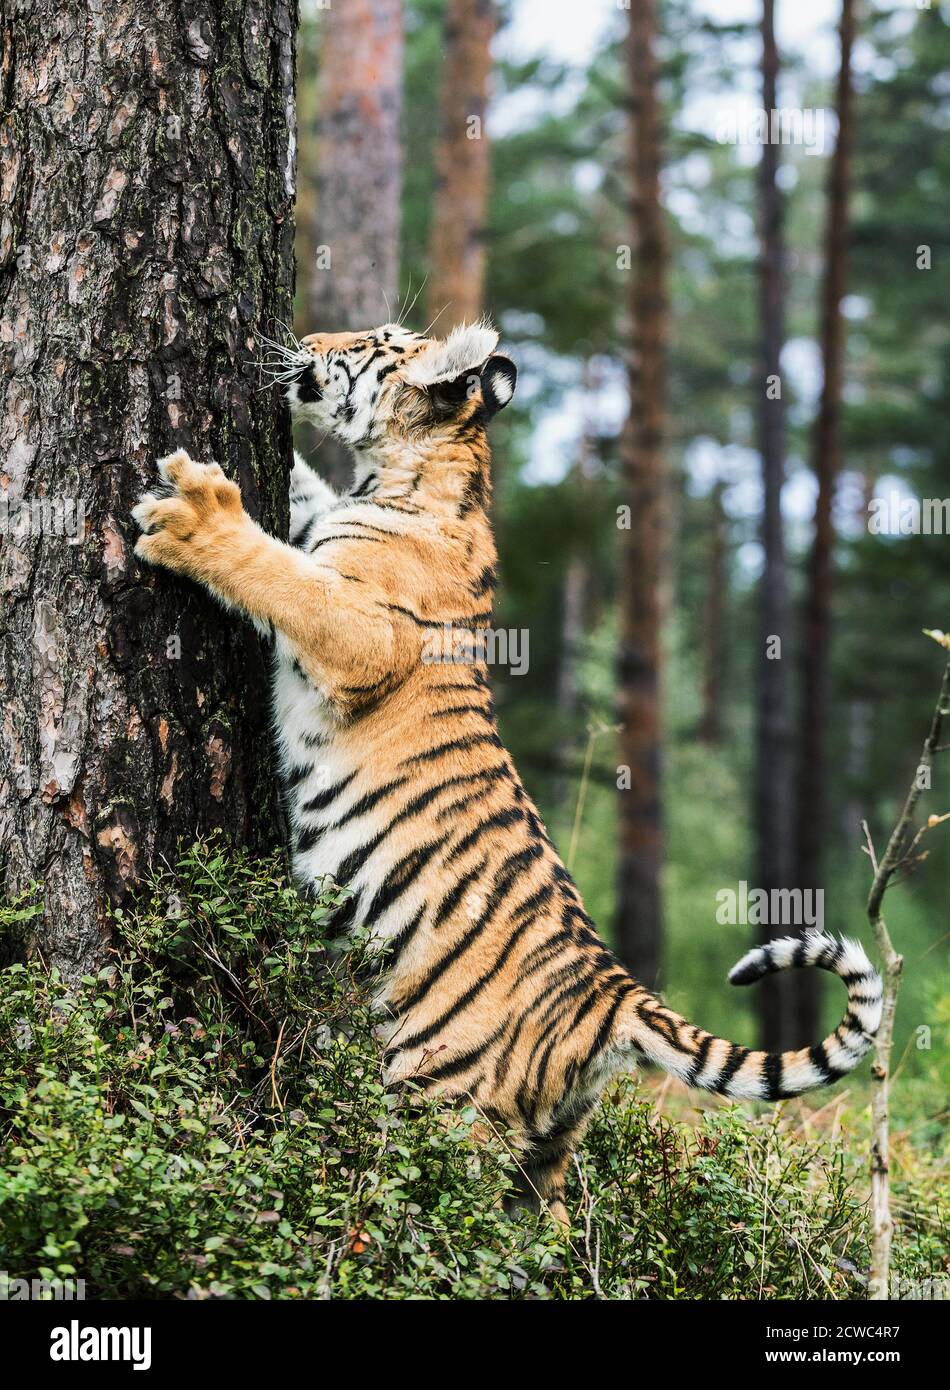 Little Ussuri tiger on a tree. Portrait of Usurian Tiger in a wild autumn landscape in sunny day. A young tiger in wildlife. Stock Photo